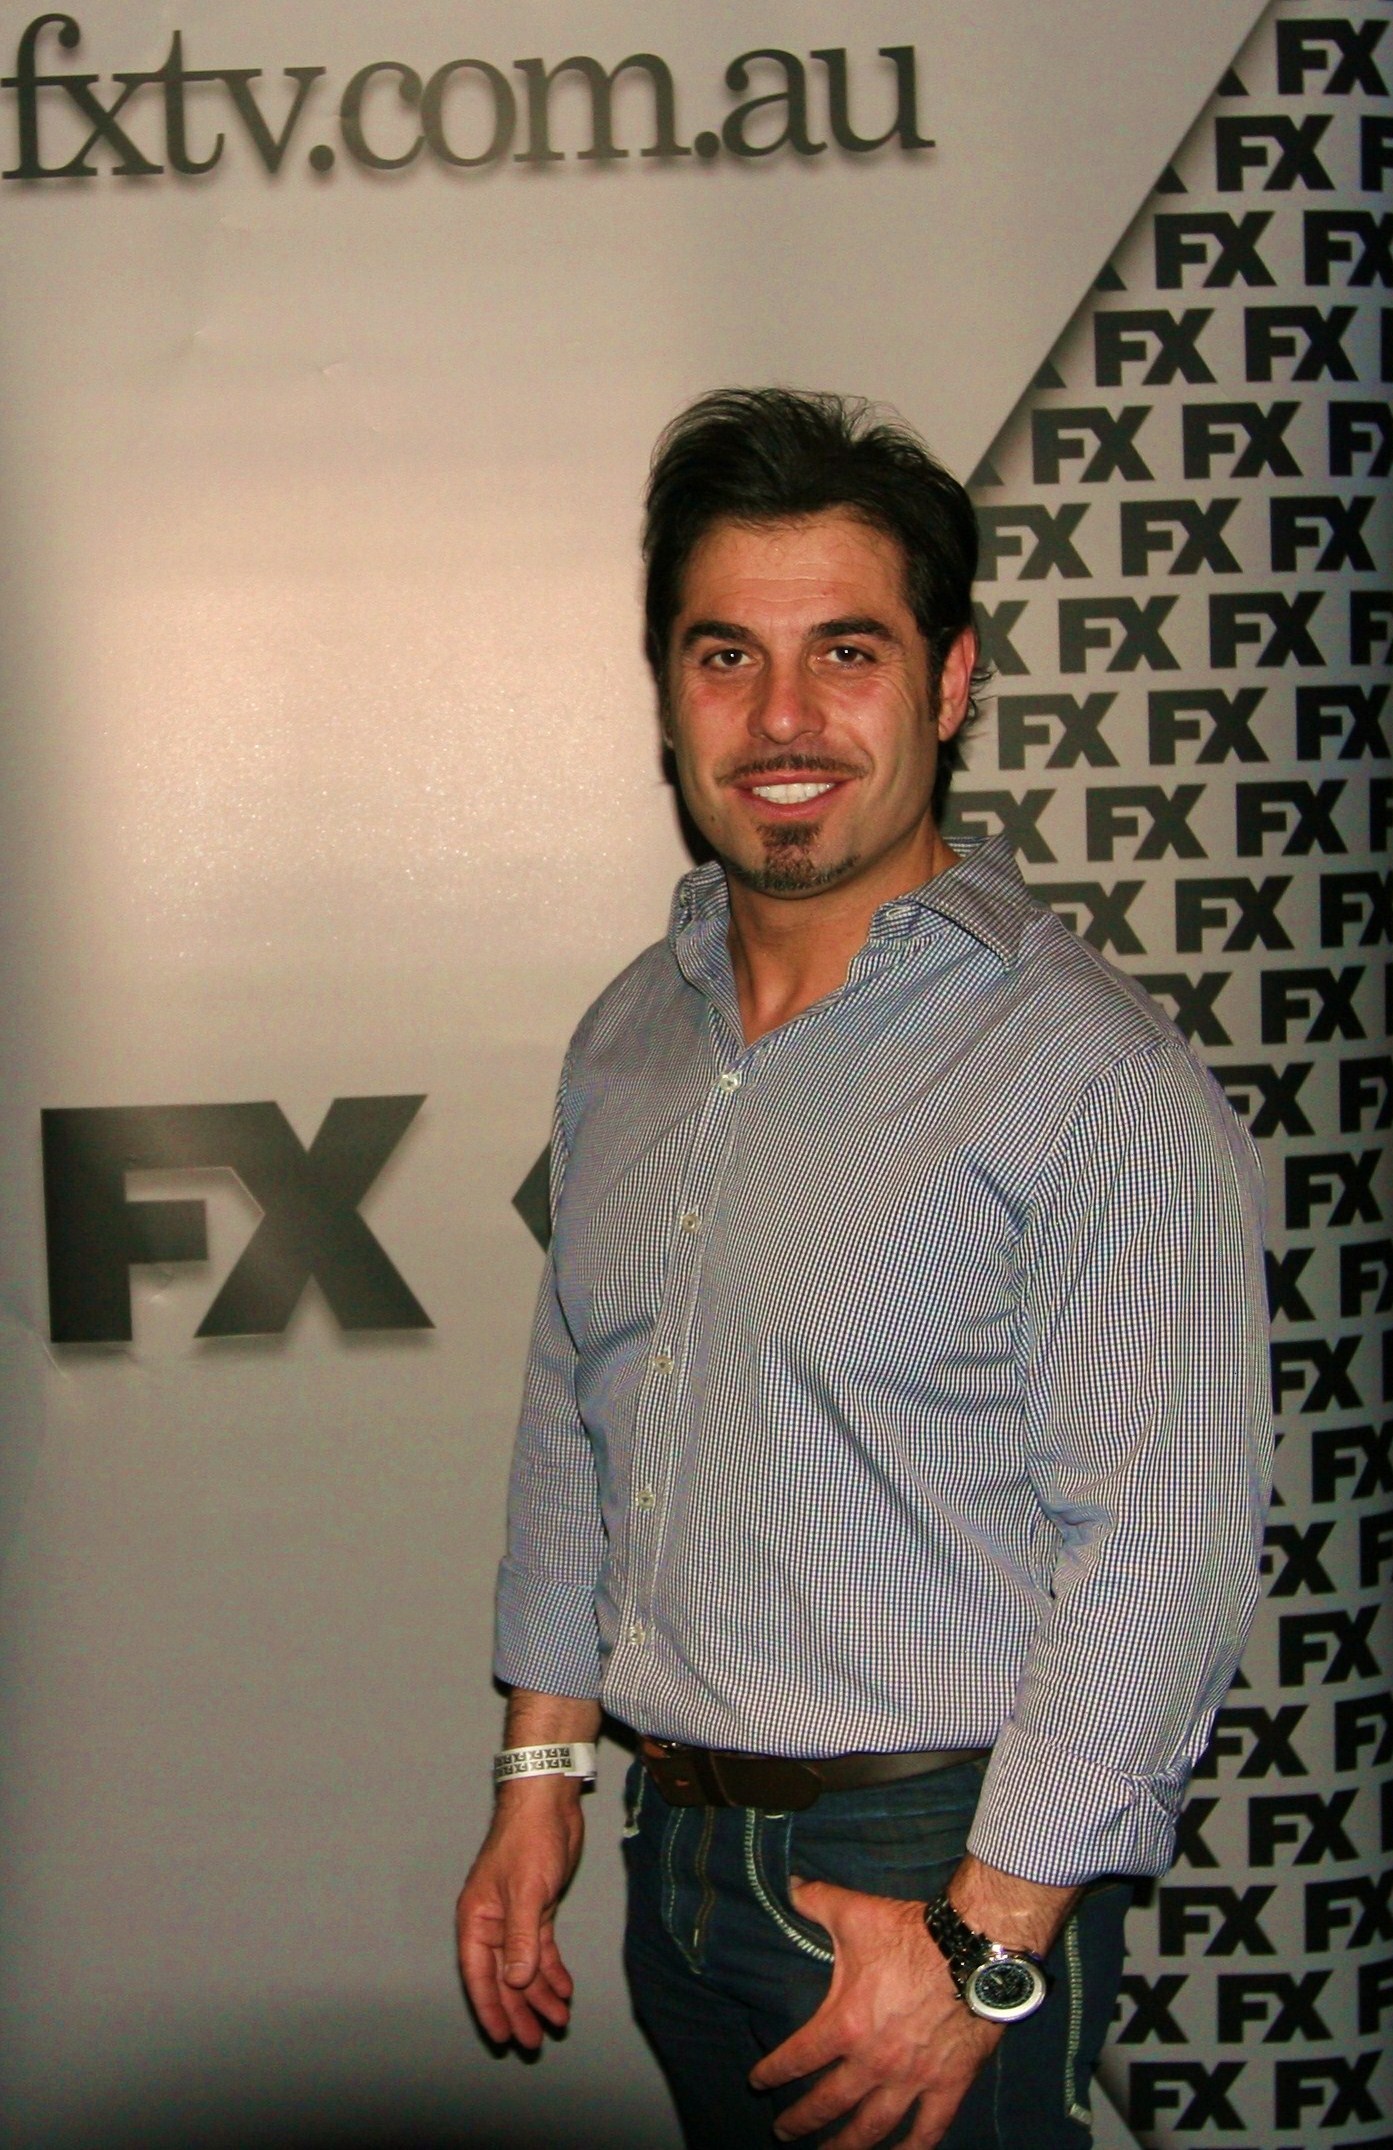 Bobey Taleb at the Red Carpet FX Premiere of The Walking Dead season 5 at Event Cinemas George street, Sydney on the 13th October 2014.